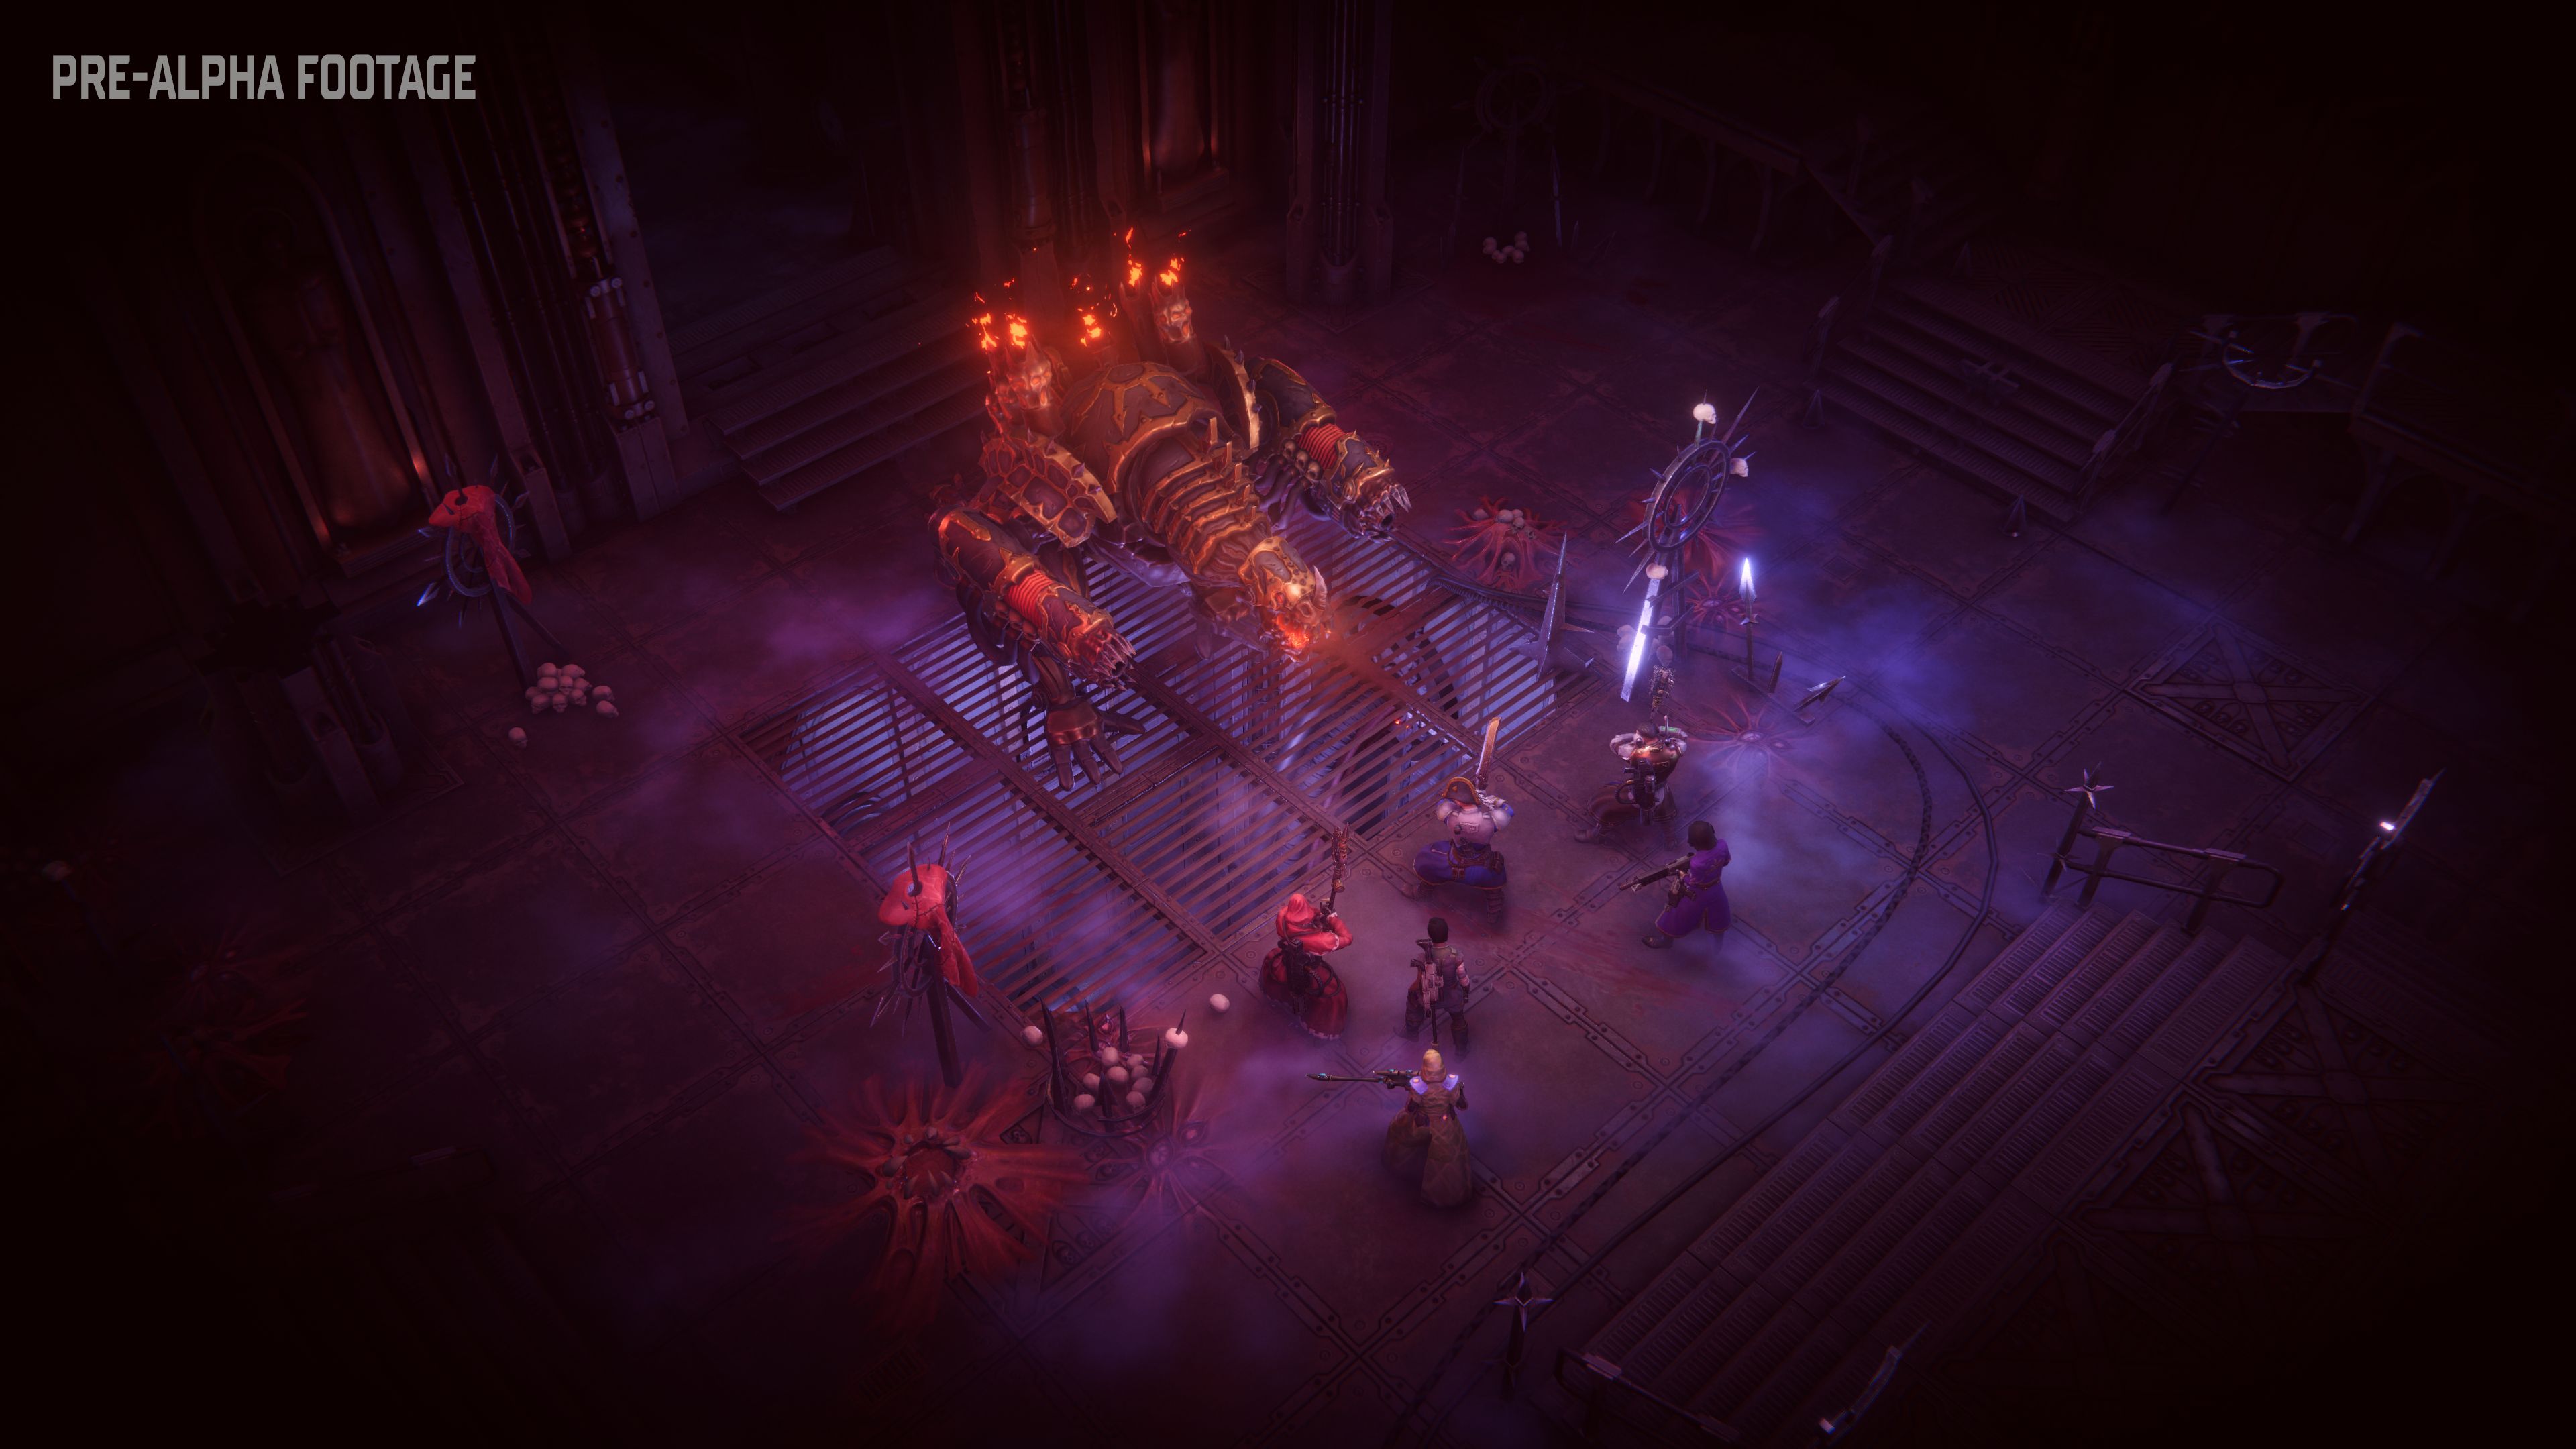 The subsequent game from the studio behind the Pathfinder RPGs is Warhammer 40,000: Rogue Trader